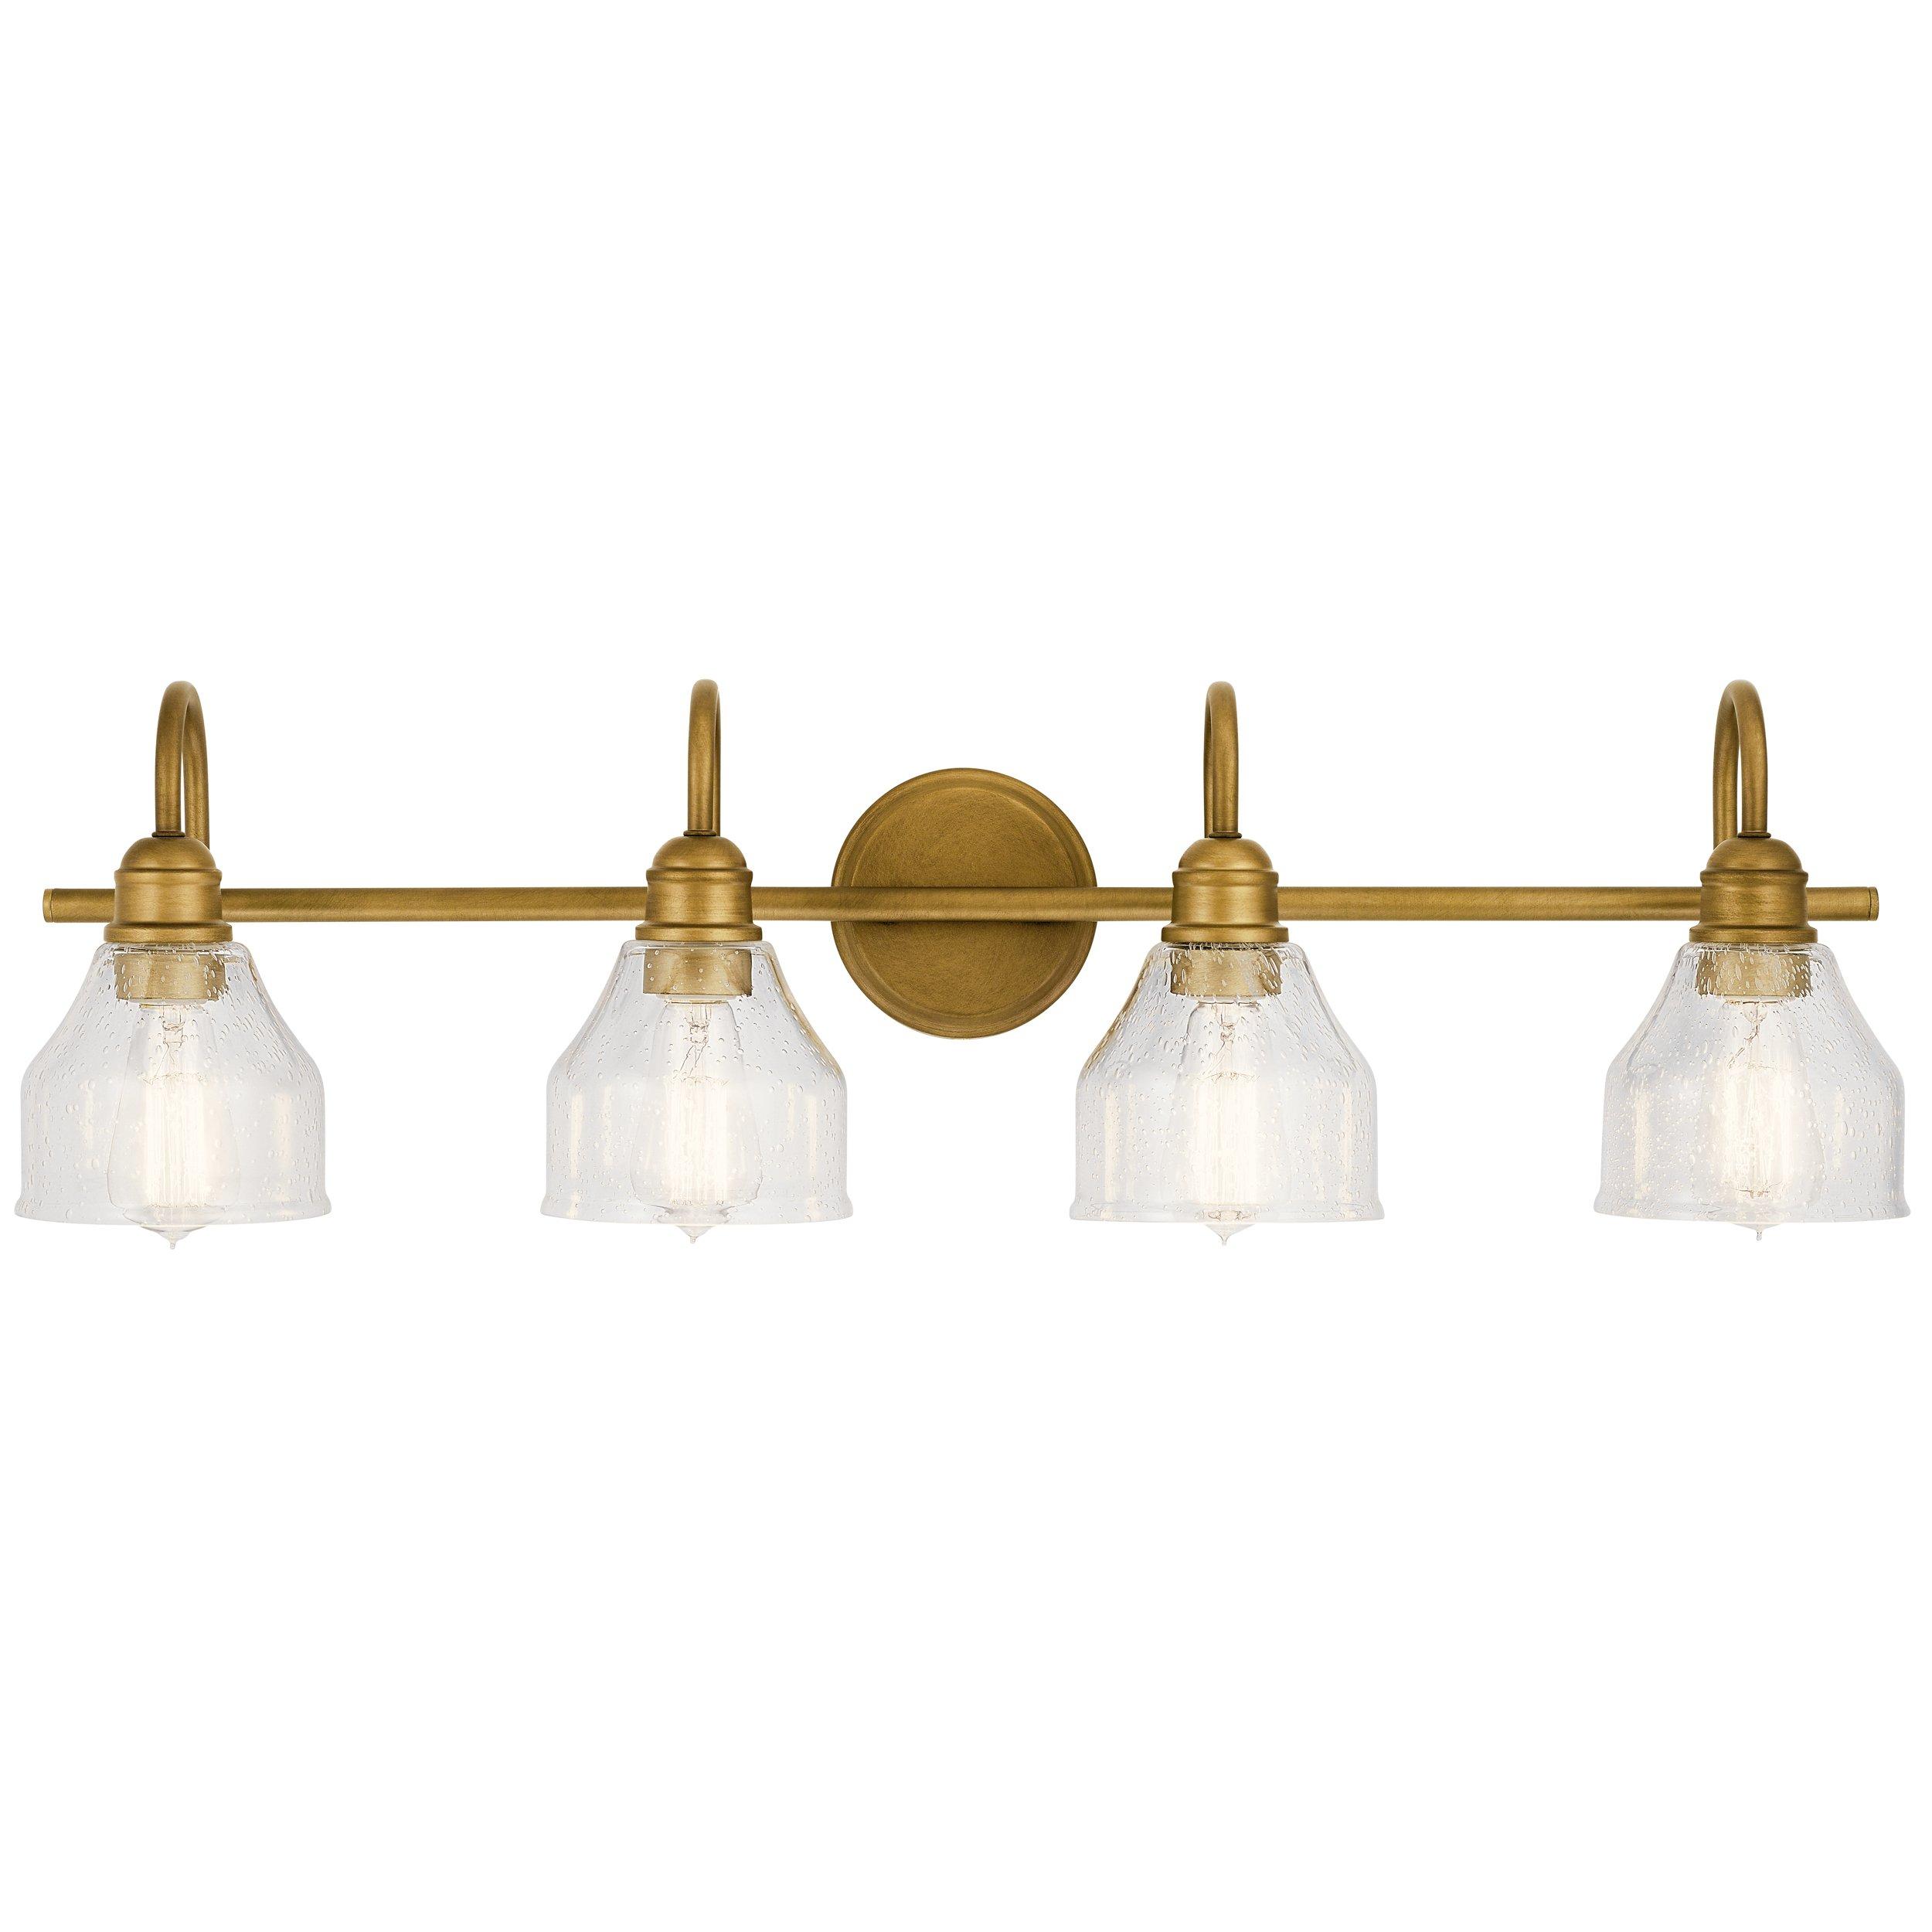 Avery Natural Brass Quad Sconce